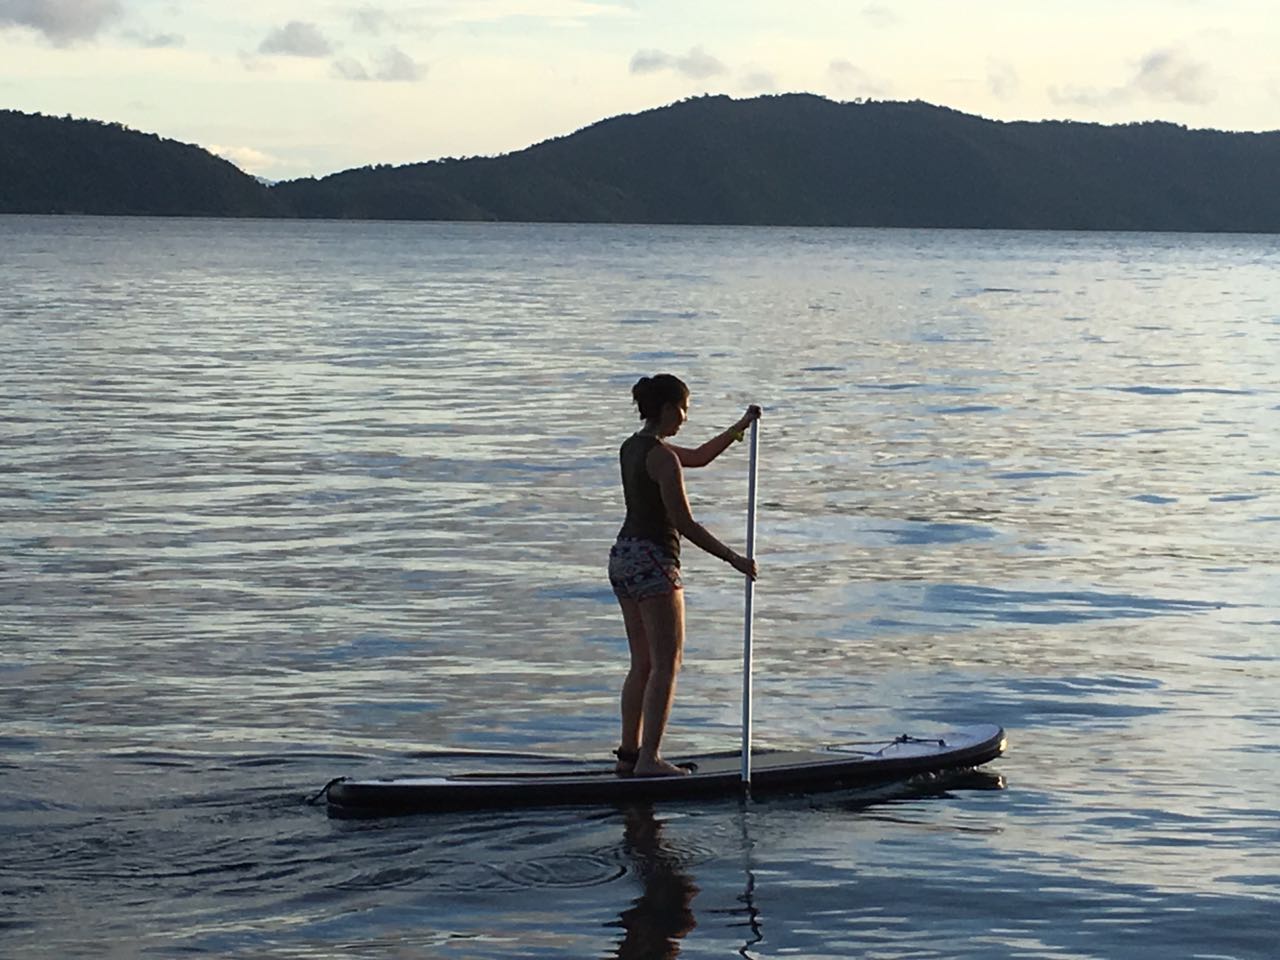 woman on a standup paddleboard with Raja Ampat islands in the background